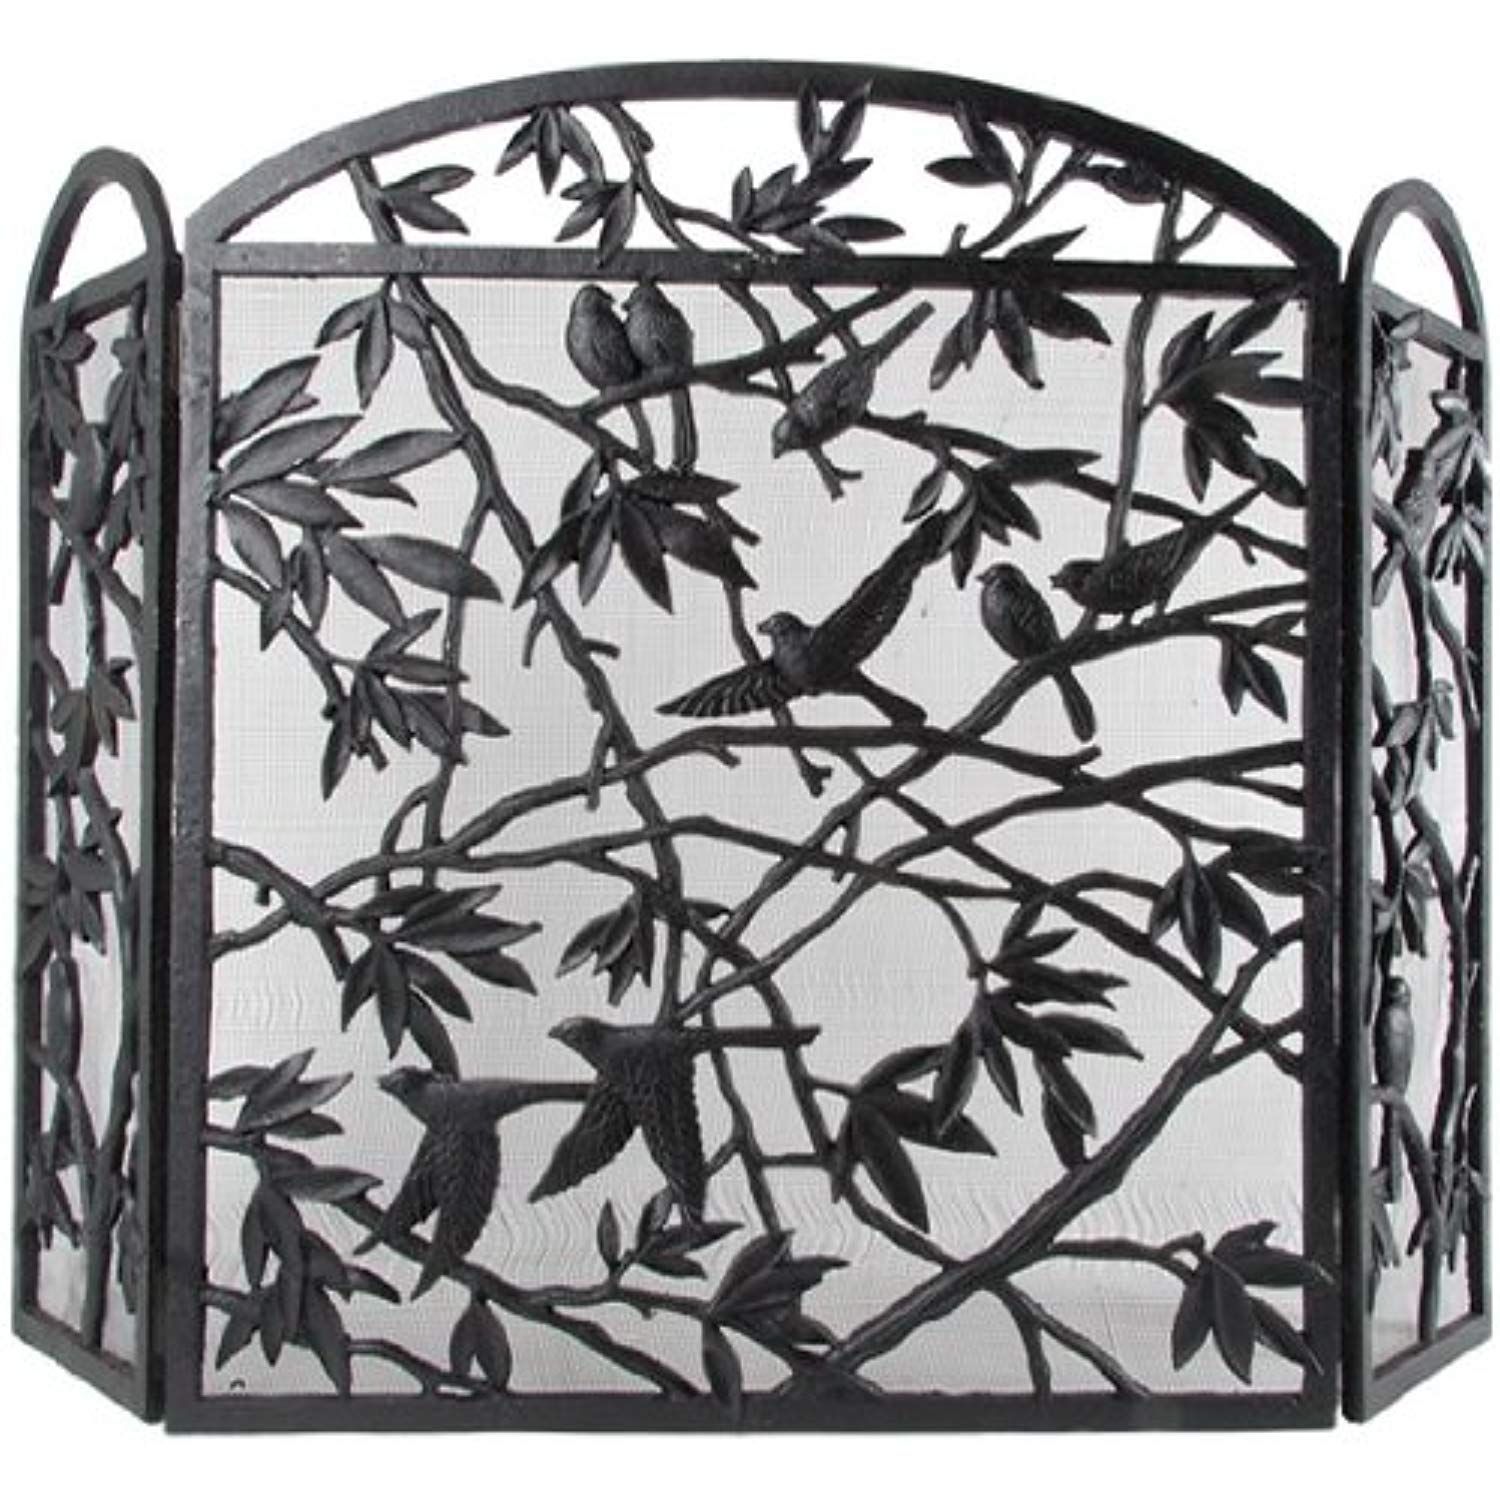 Hobby Lobby Fireplace Screens Elegant Nach Fireplace Screen Bird Design Check Out the Image by